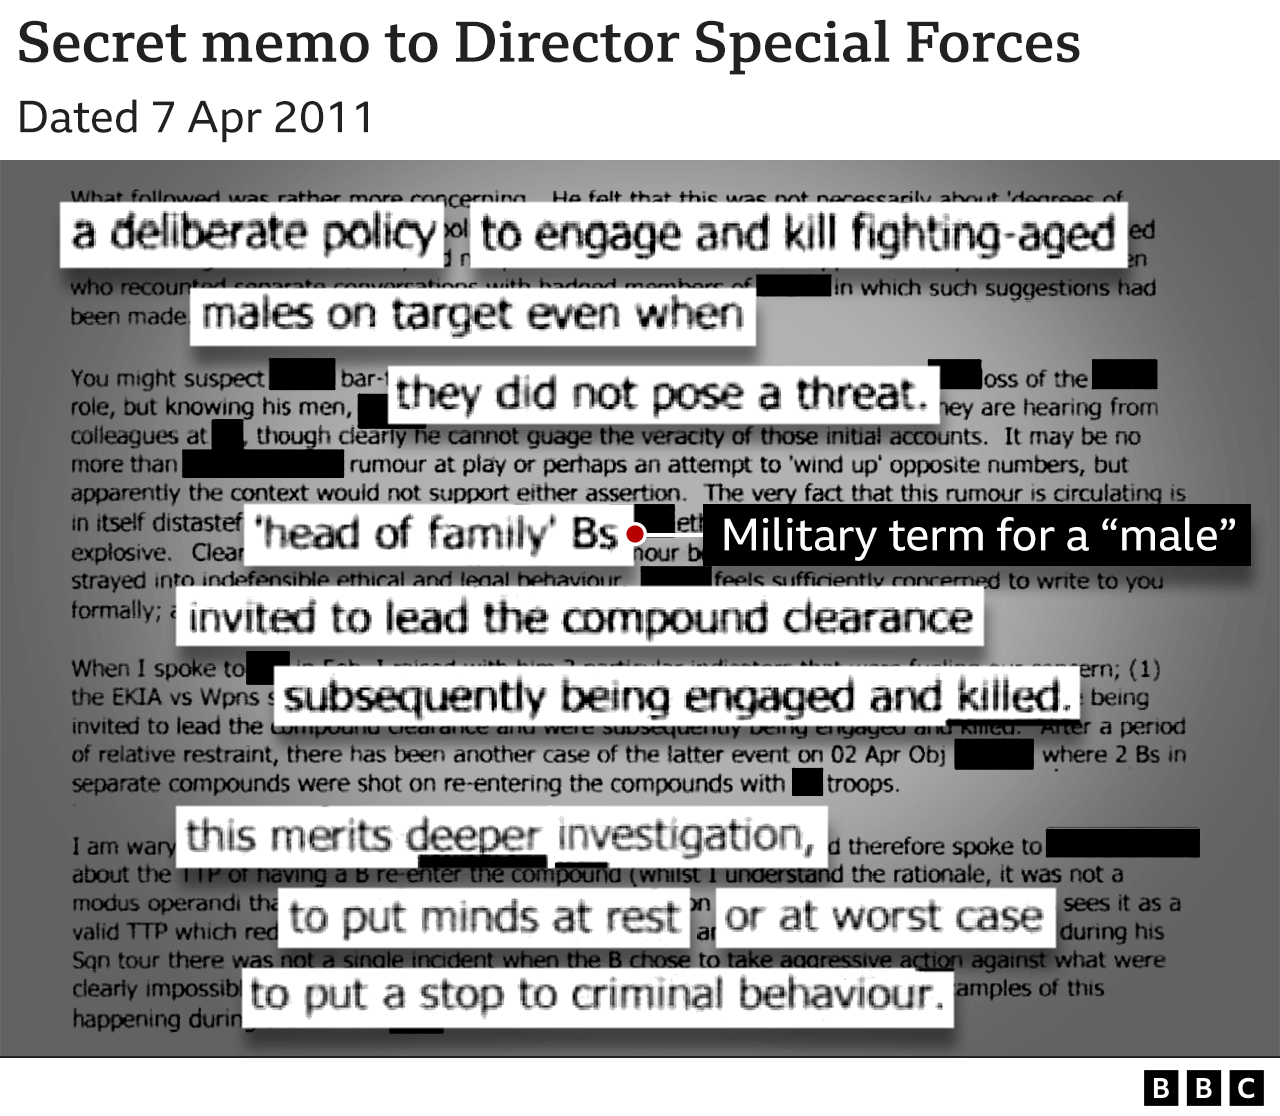 Secret memo to Director Special Forces